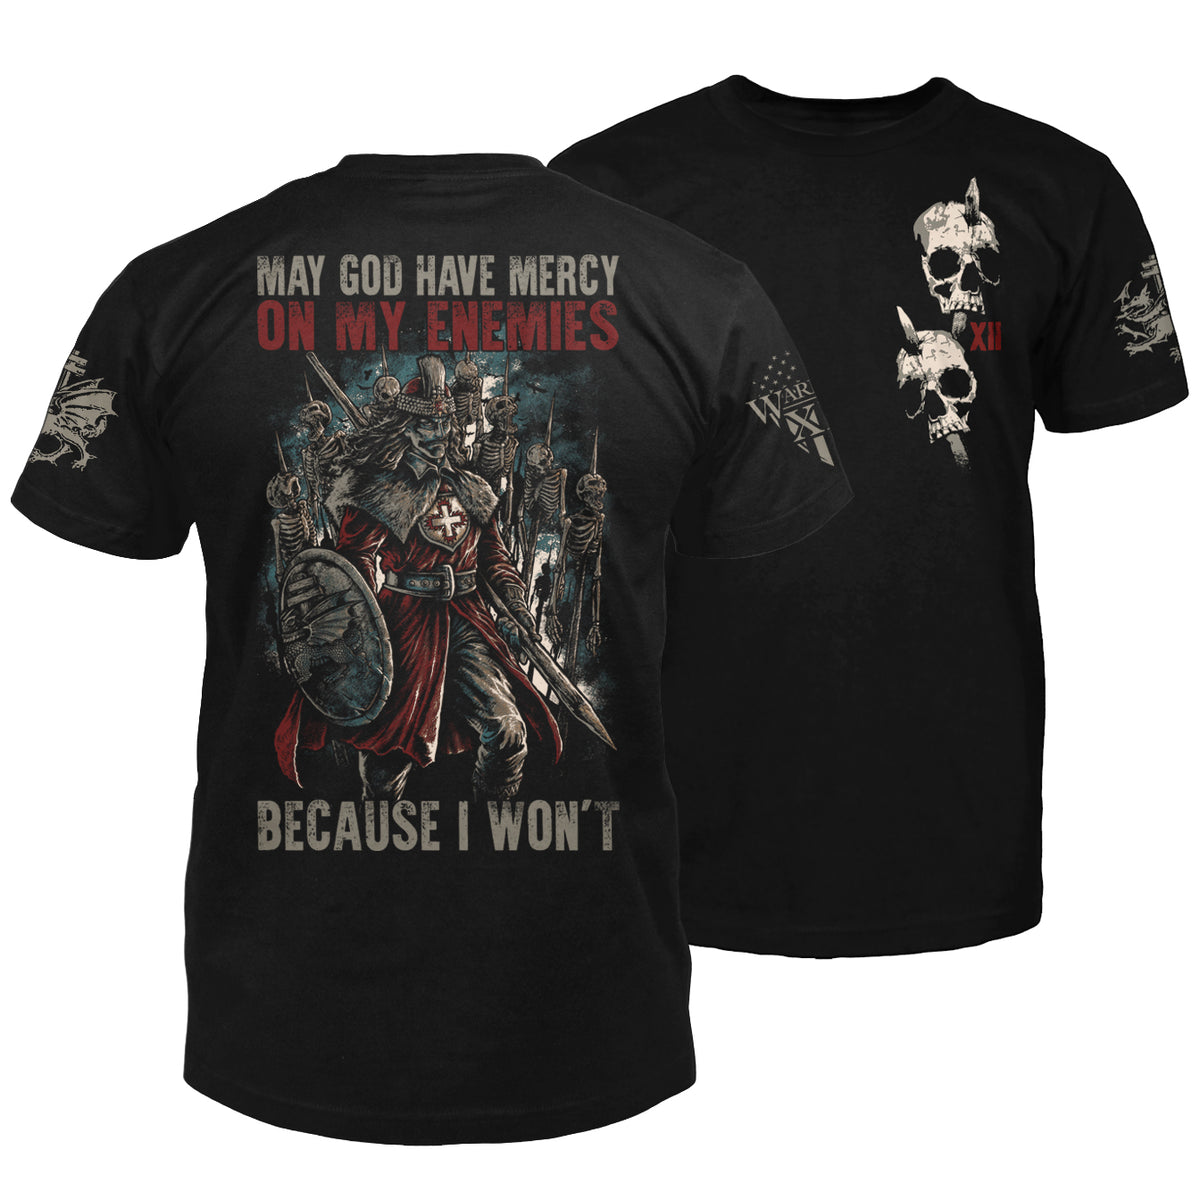 Front & back black t-shirt with the words "May God have mercy on my enemies because I won't" with Vlad The Impaler printed on the shirt. 